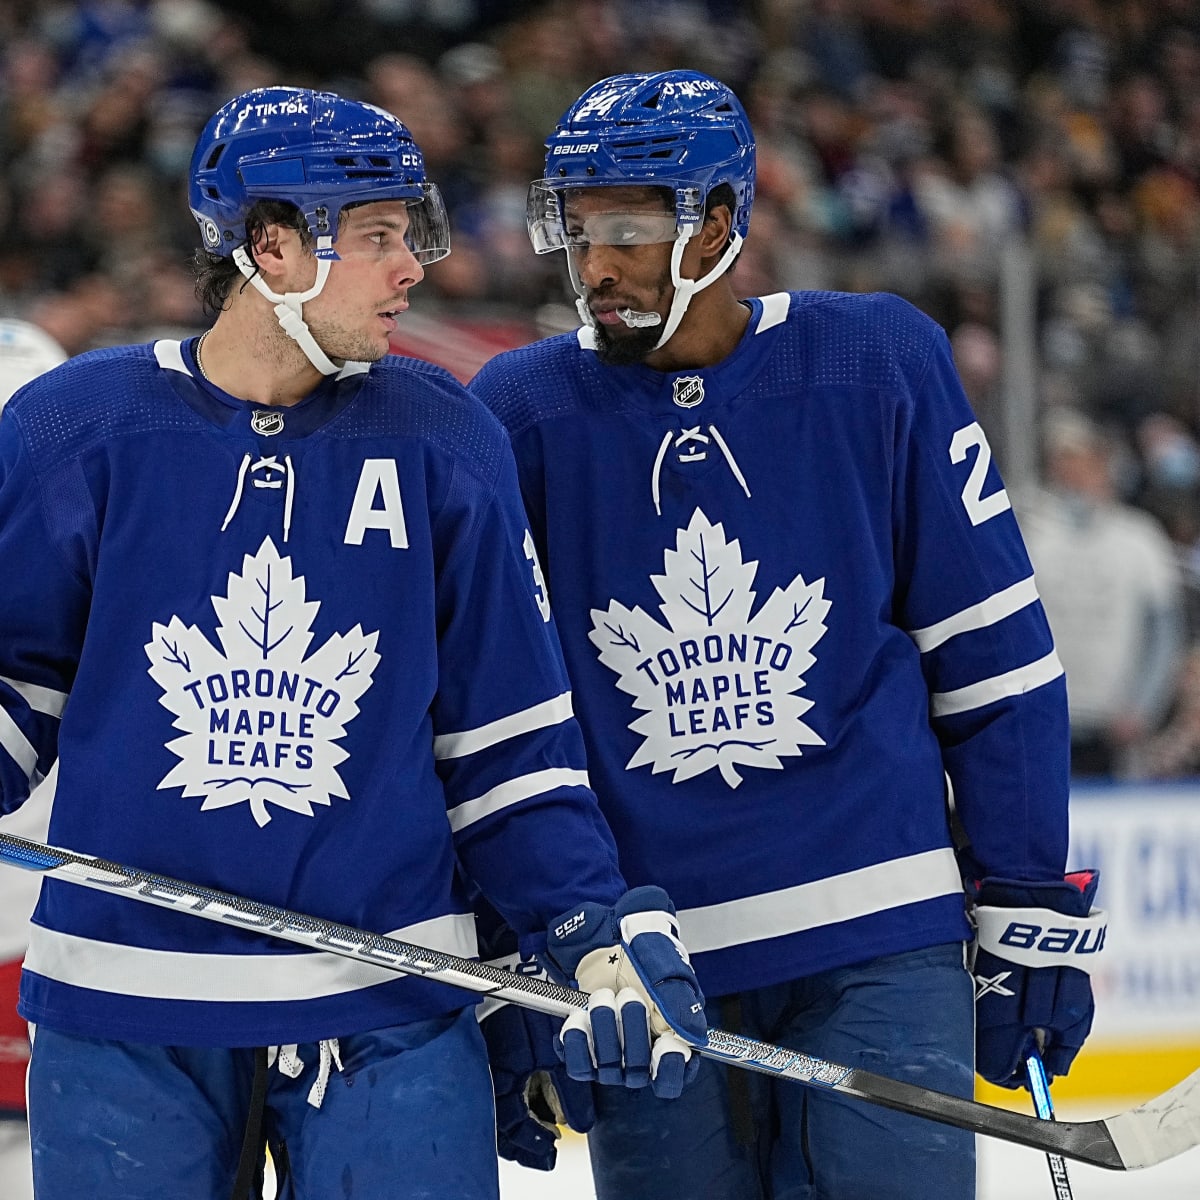 Toronto Maple Leafs: Wayne Simmonds loss a huge blow for player